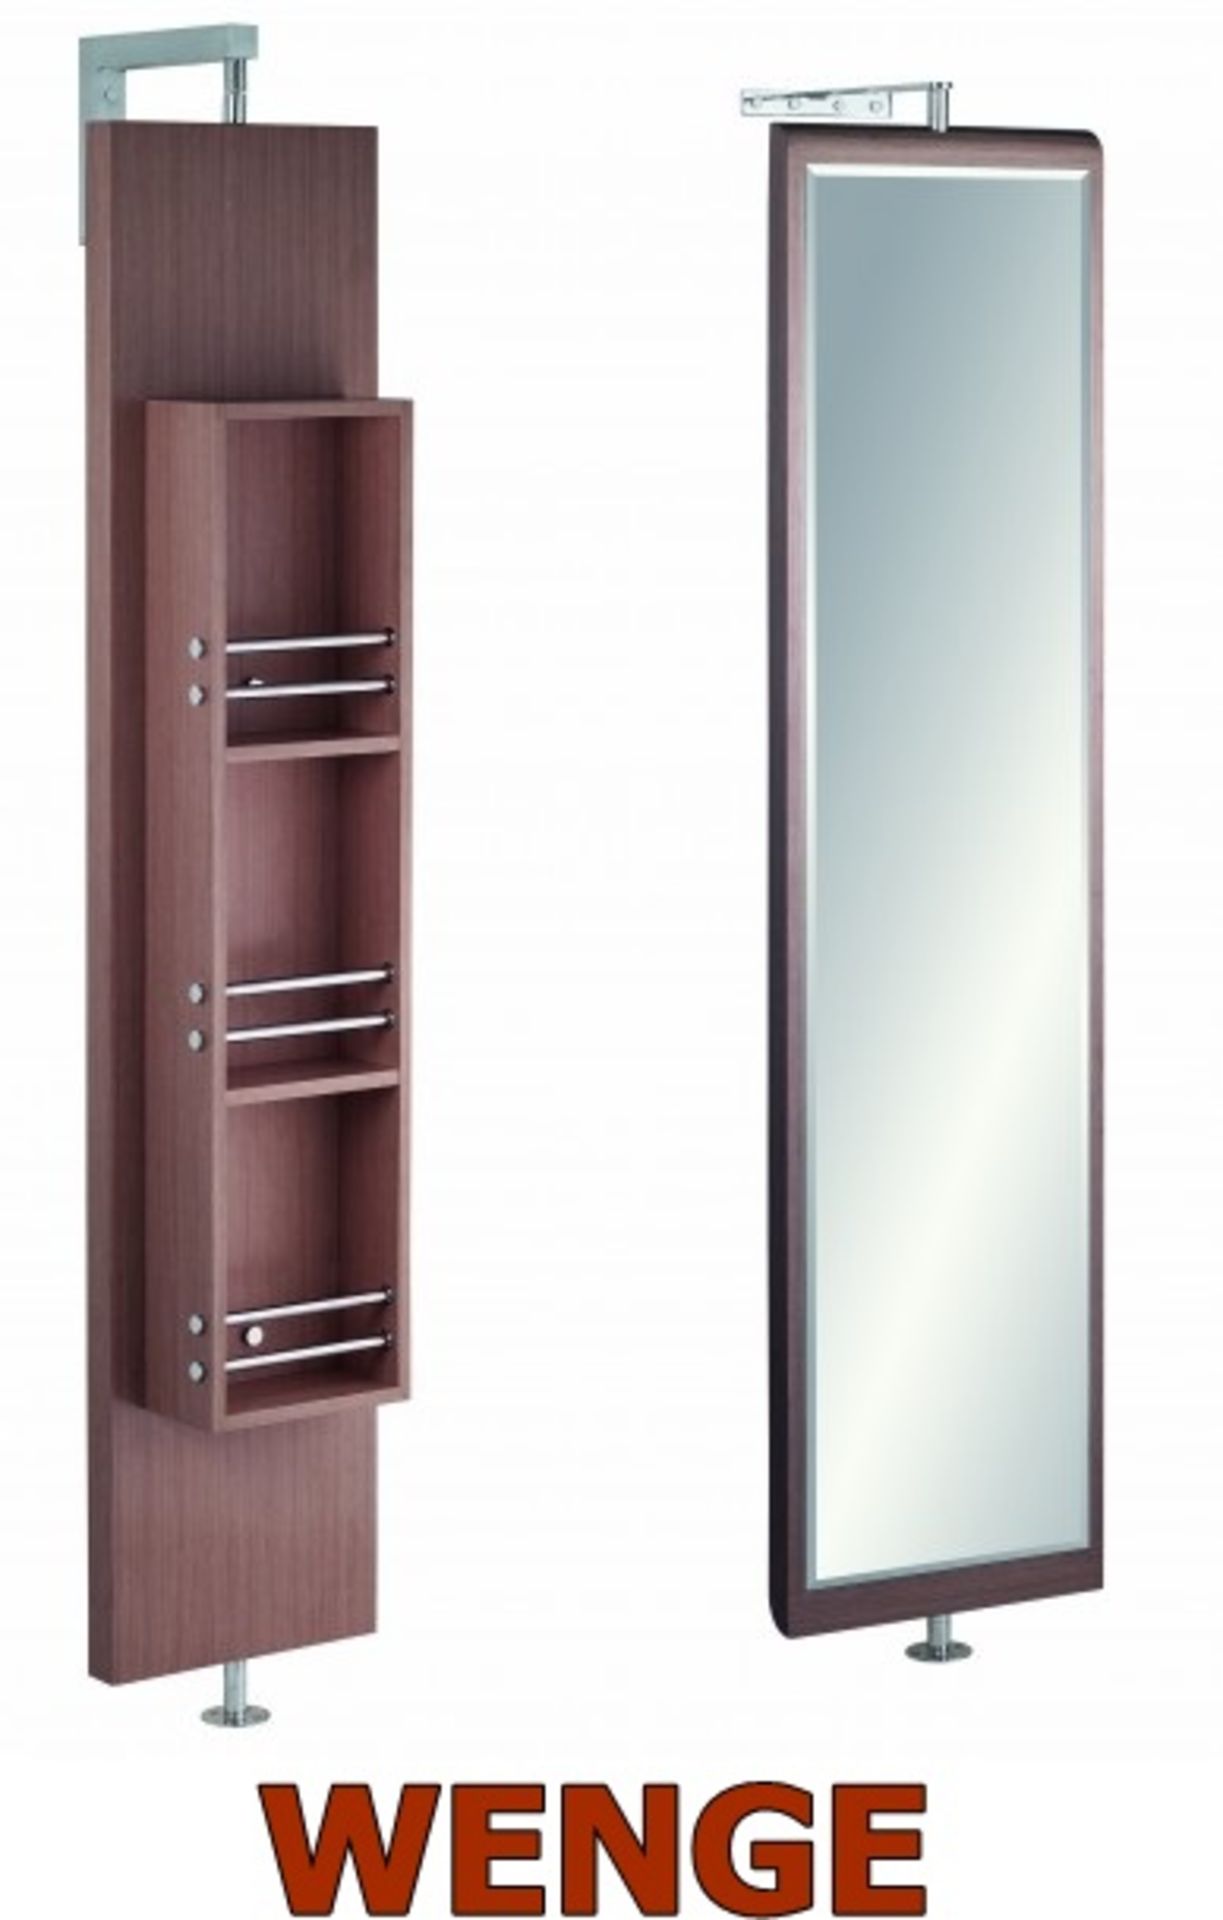 1 x Vogue ARC Series 2 Bathroom FULL LENGTH SWIVEL MIRROR With Storage - WENGE - Manufactured to the